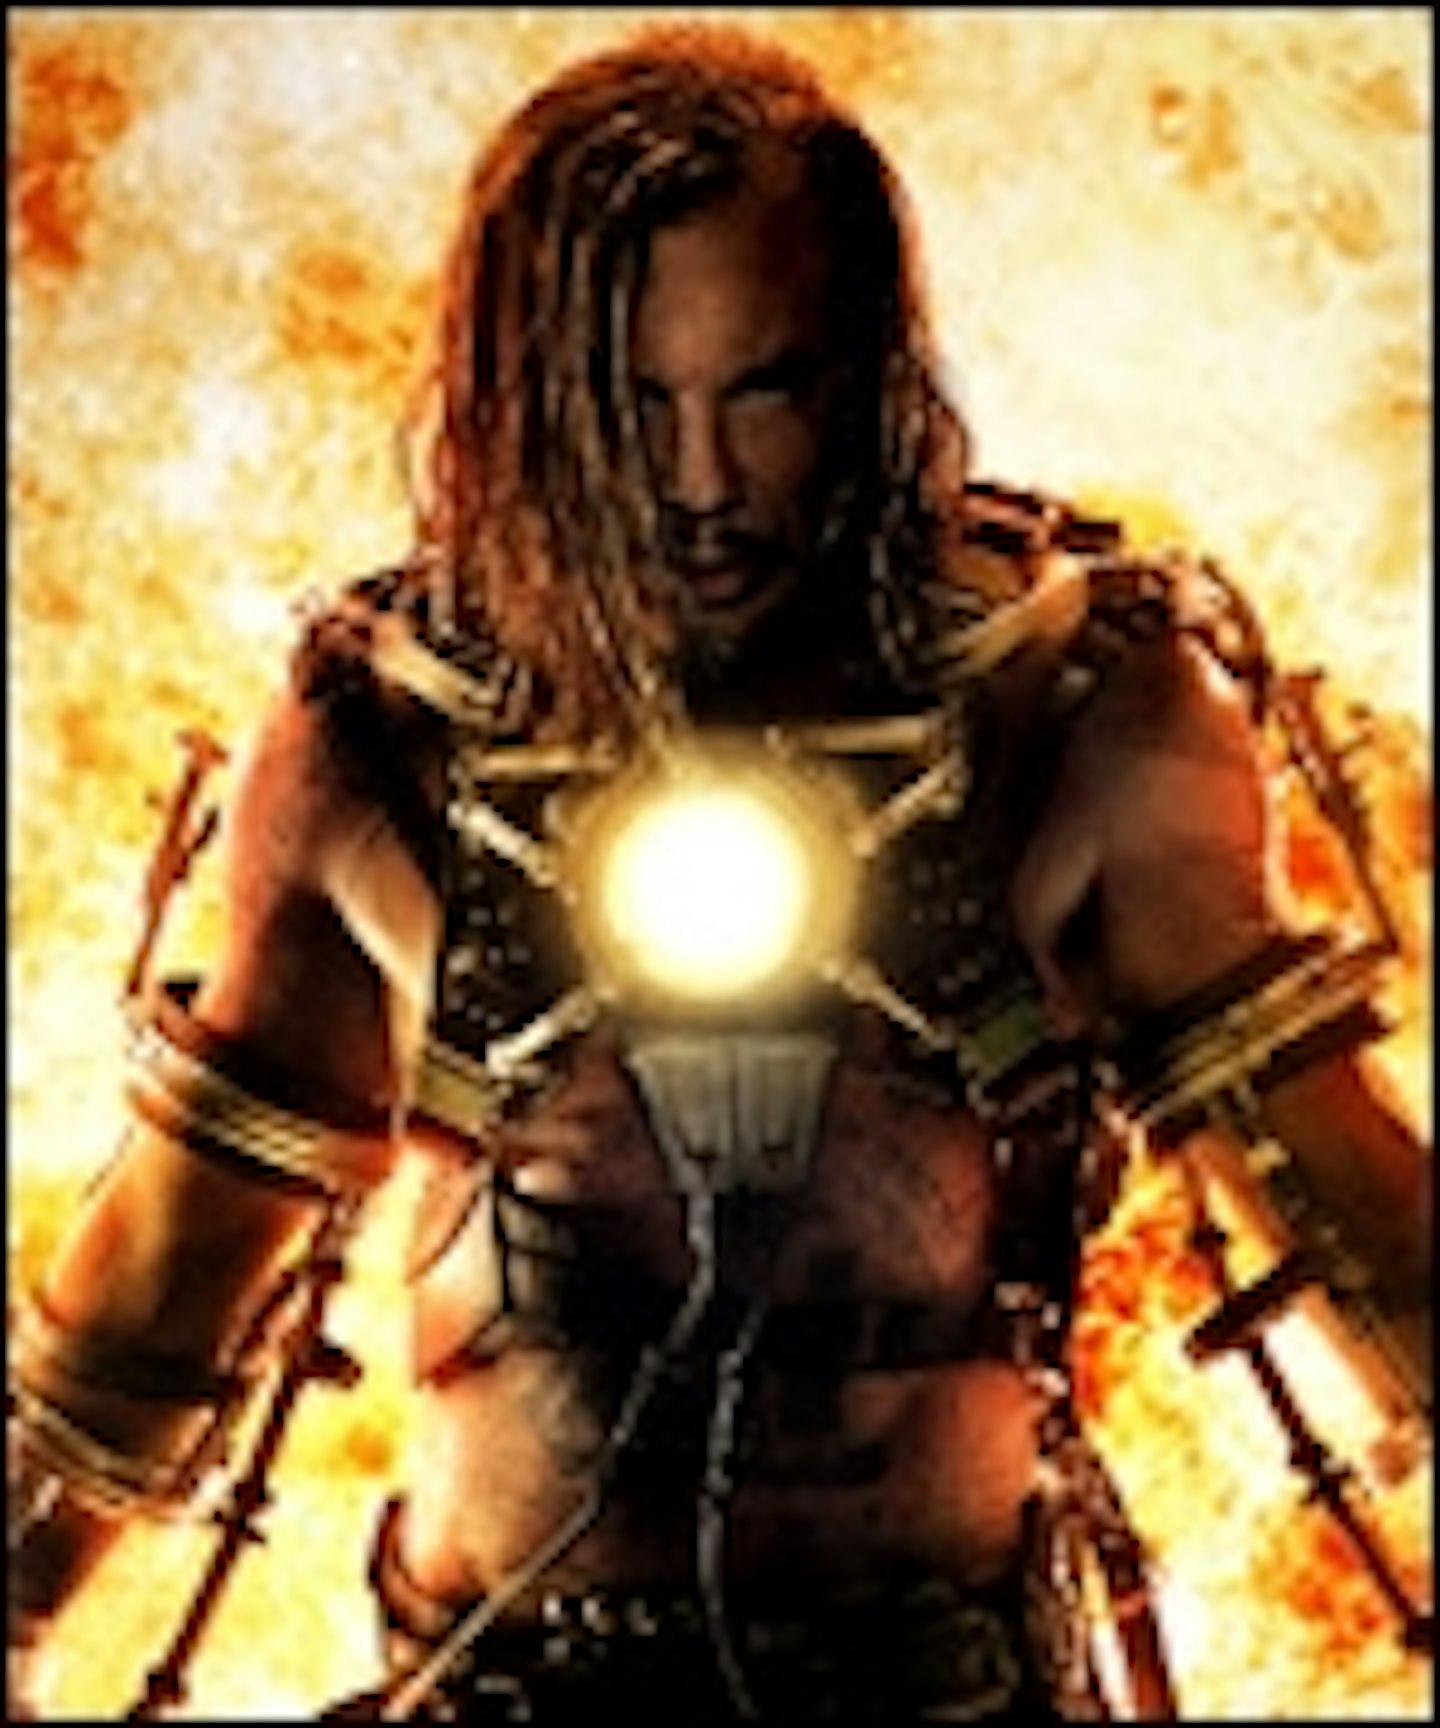 Final Iron Man 2 Poster Goes Online